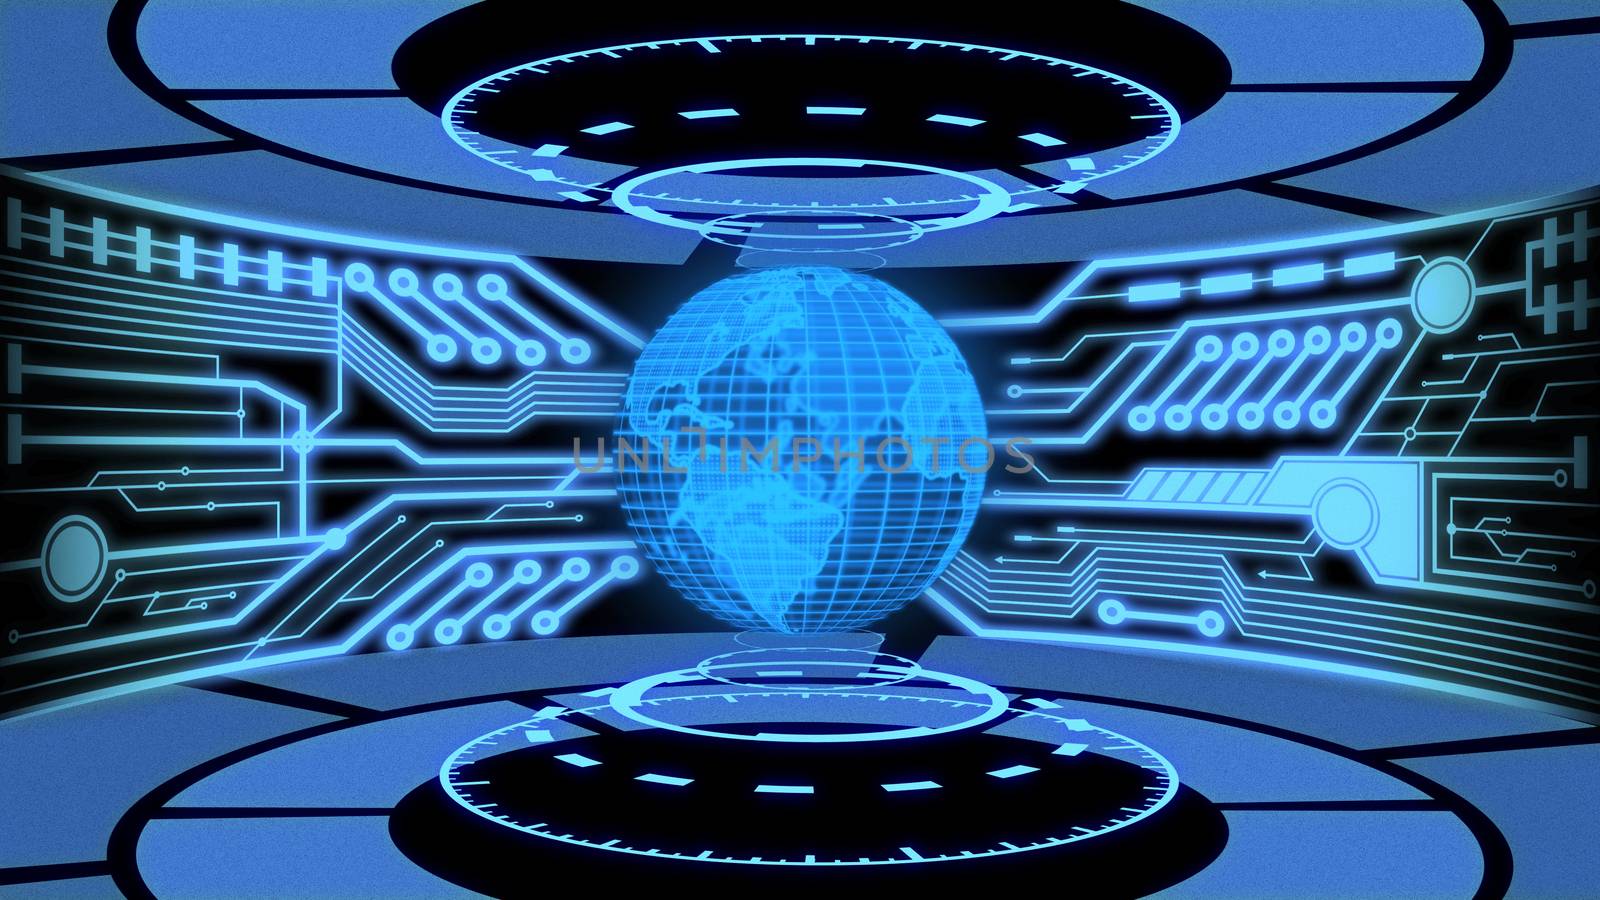 3D Digital Earth and Digital circuit in Blue Color theme laboratory background by ariya23156